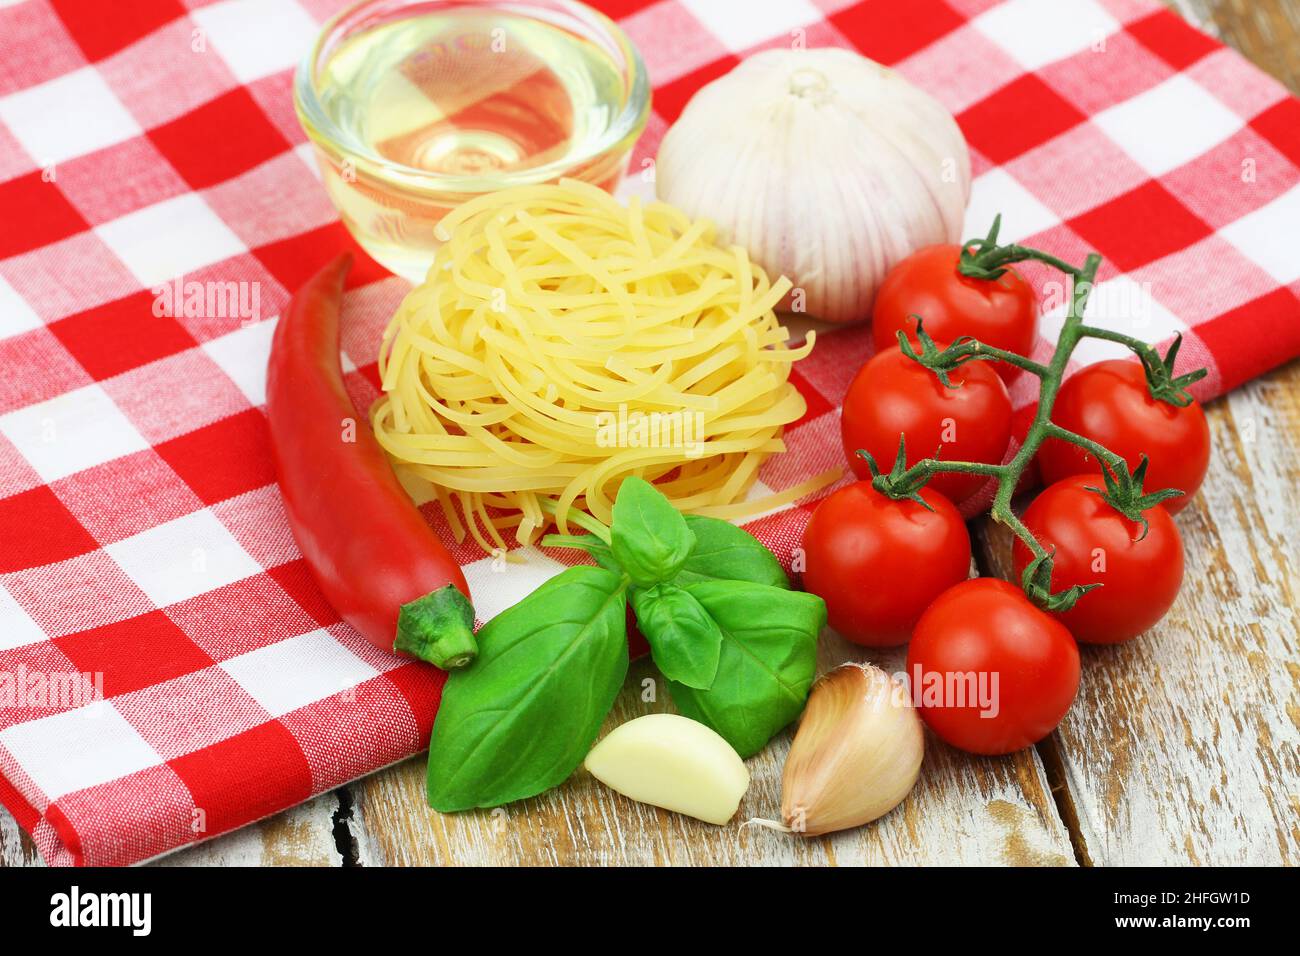 Ingredients for cooking pasta: tagliatelle, cherry tomatoes, garlic, fresh basil, chili and bowl of olive oil Stock Photo